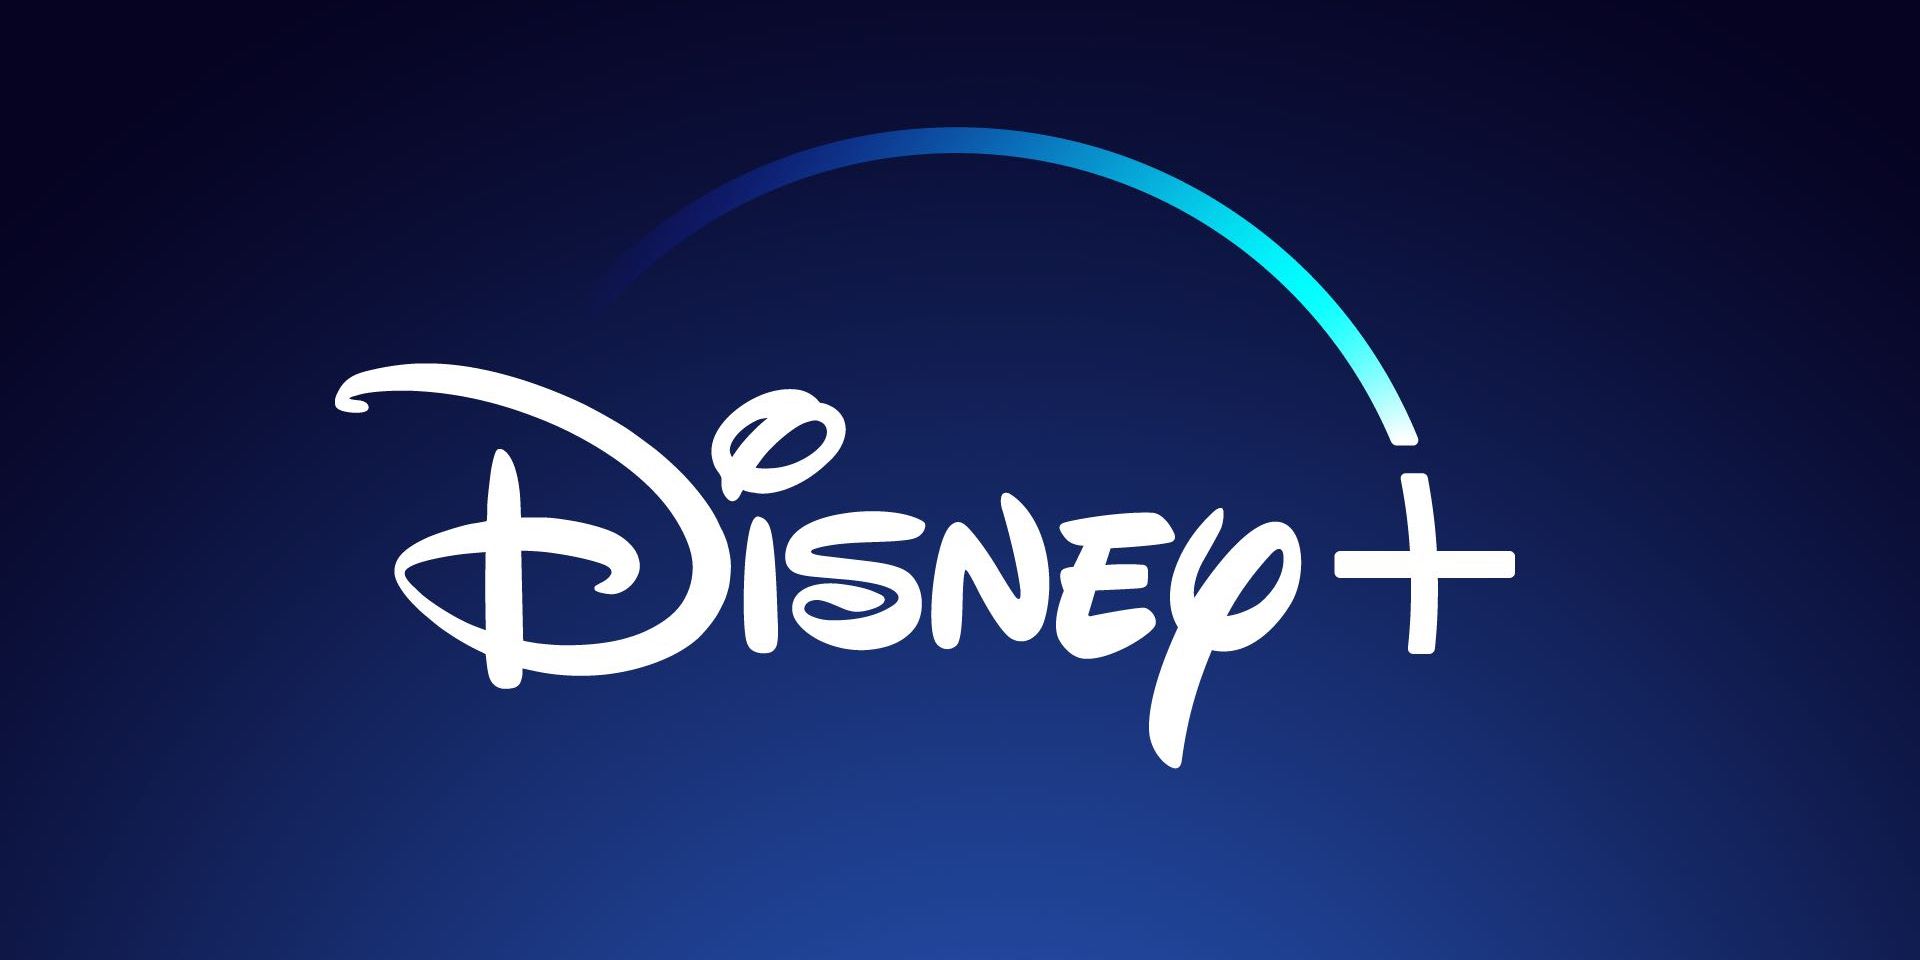 Disney+: Every New Movie & TV Show Coming In October 2021